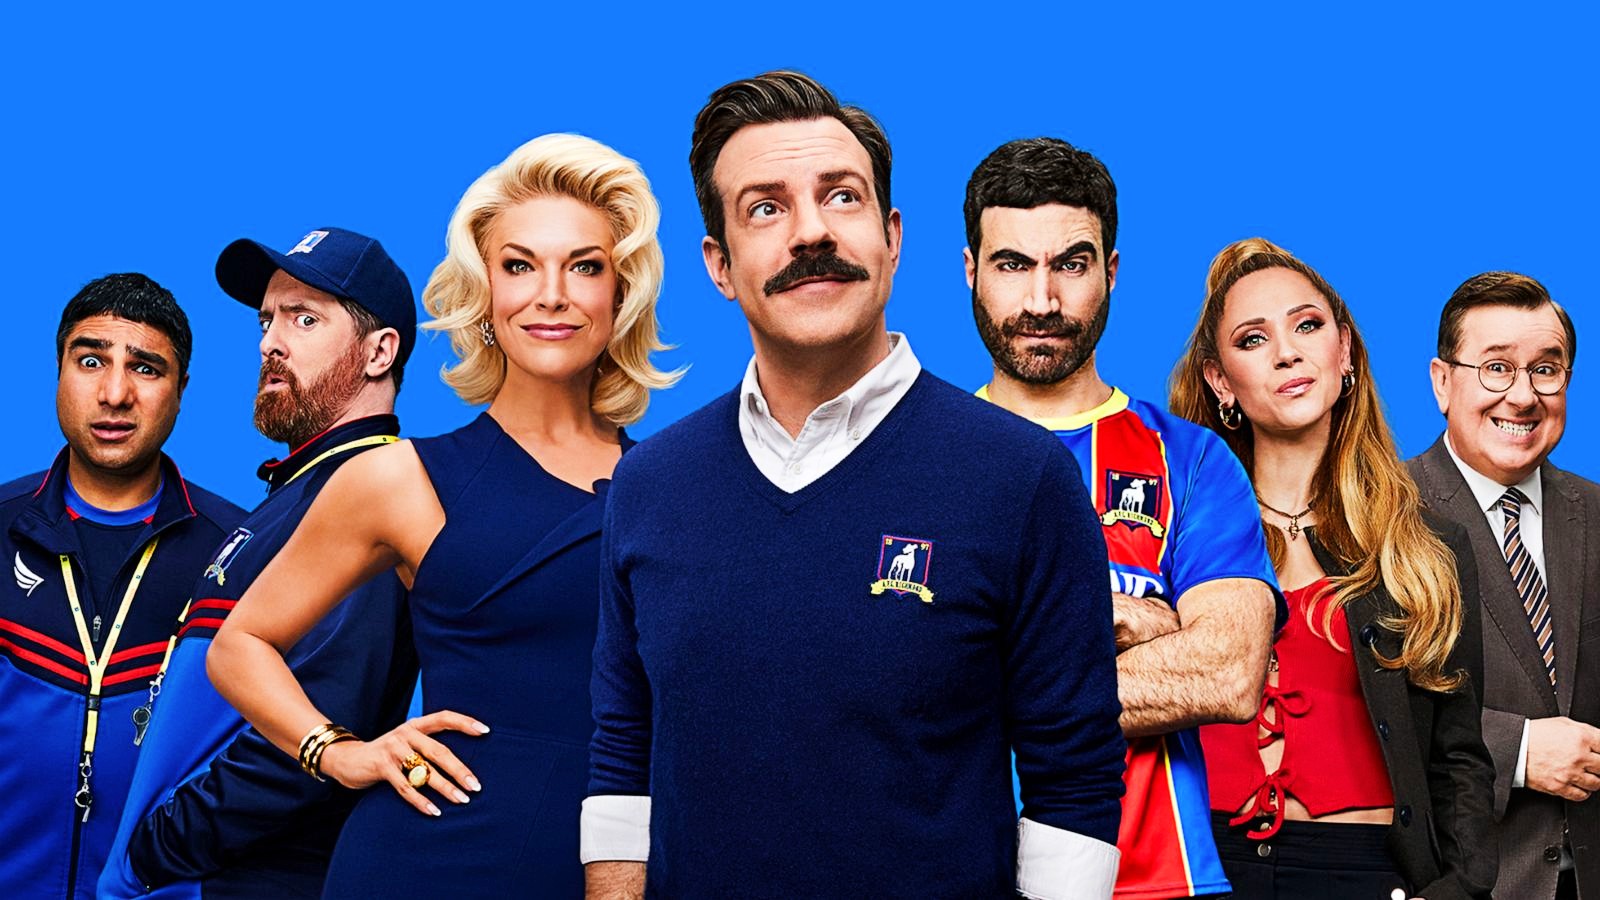 Ted lasso saison 3 streaming vf